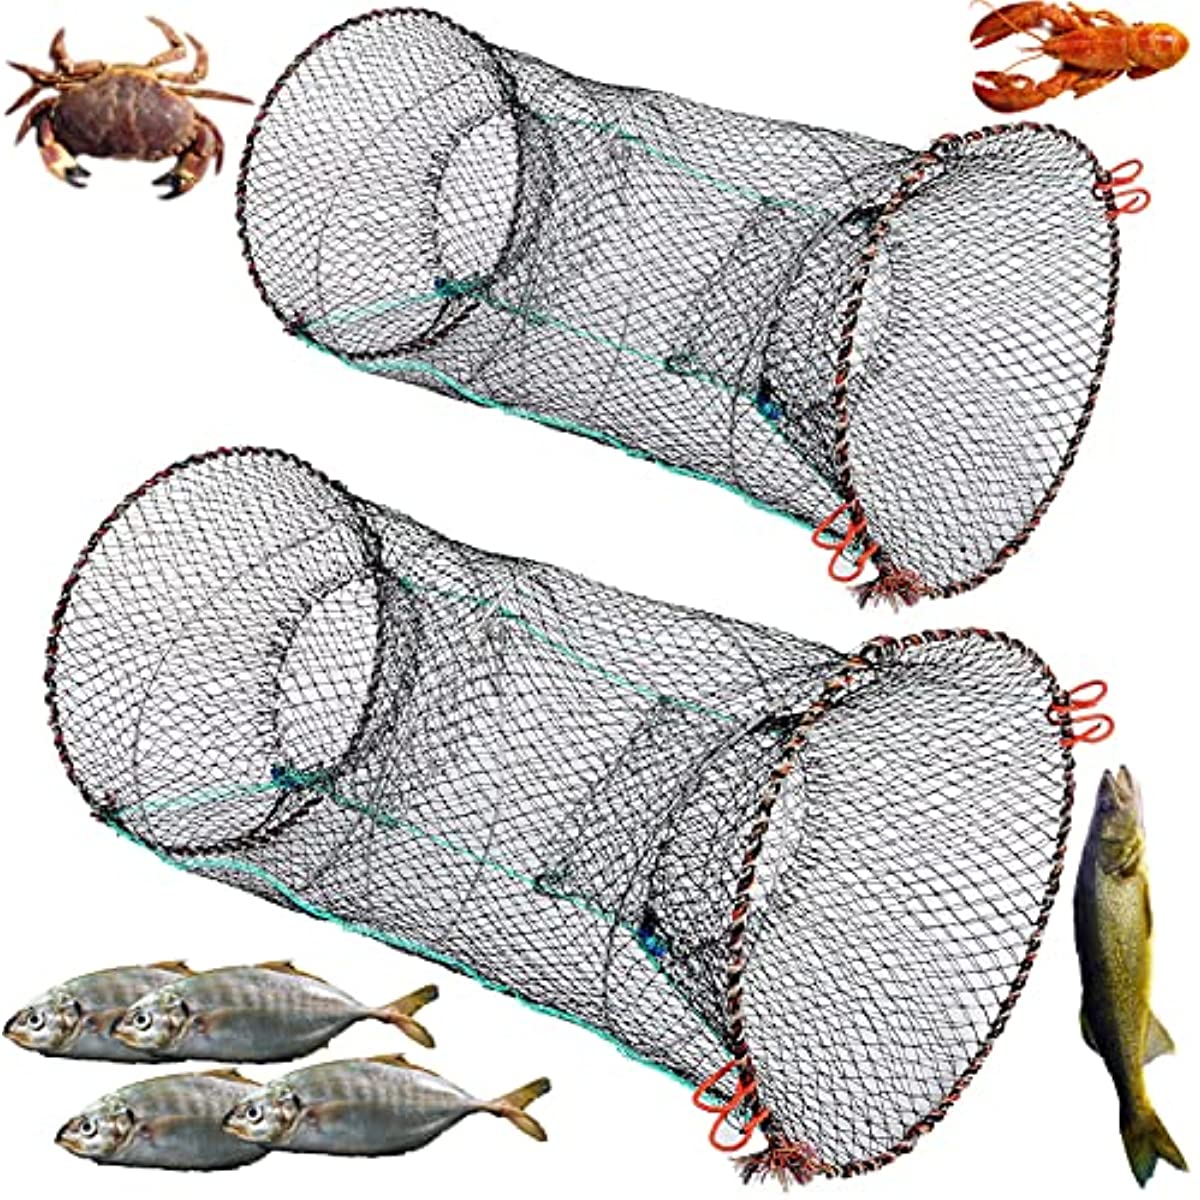 1pc Fishing Net With Handle For Catching Fish And Shrimp, Mini Fishing Net